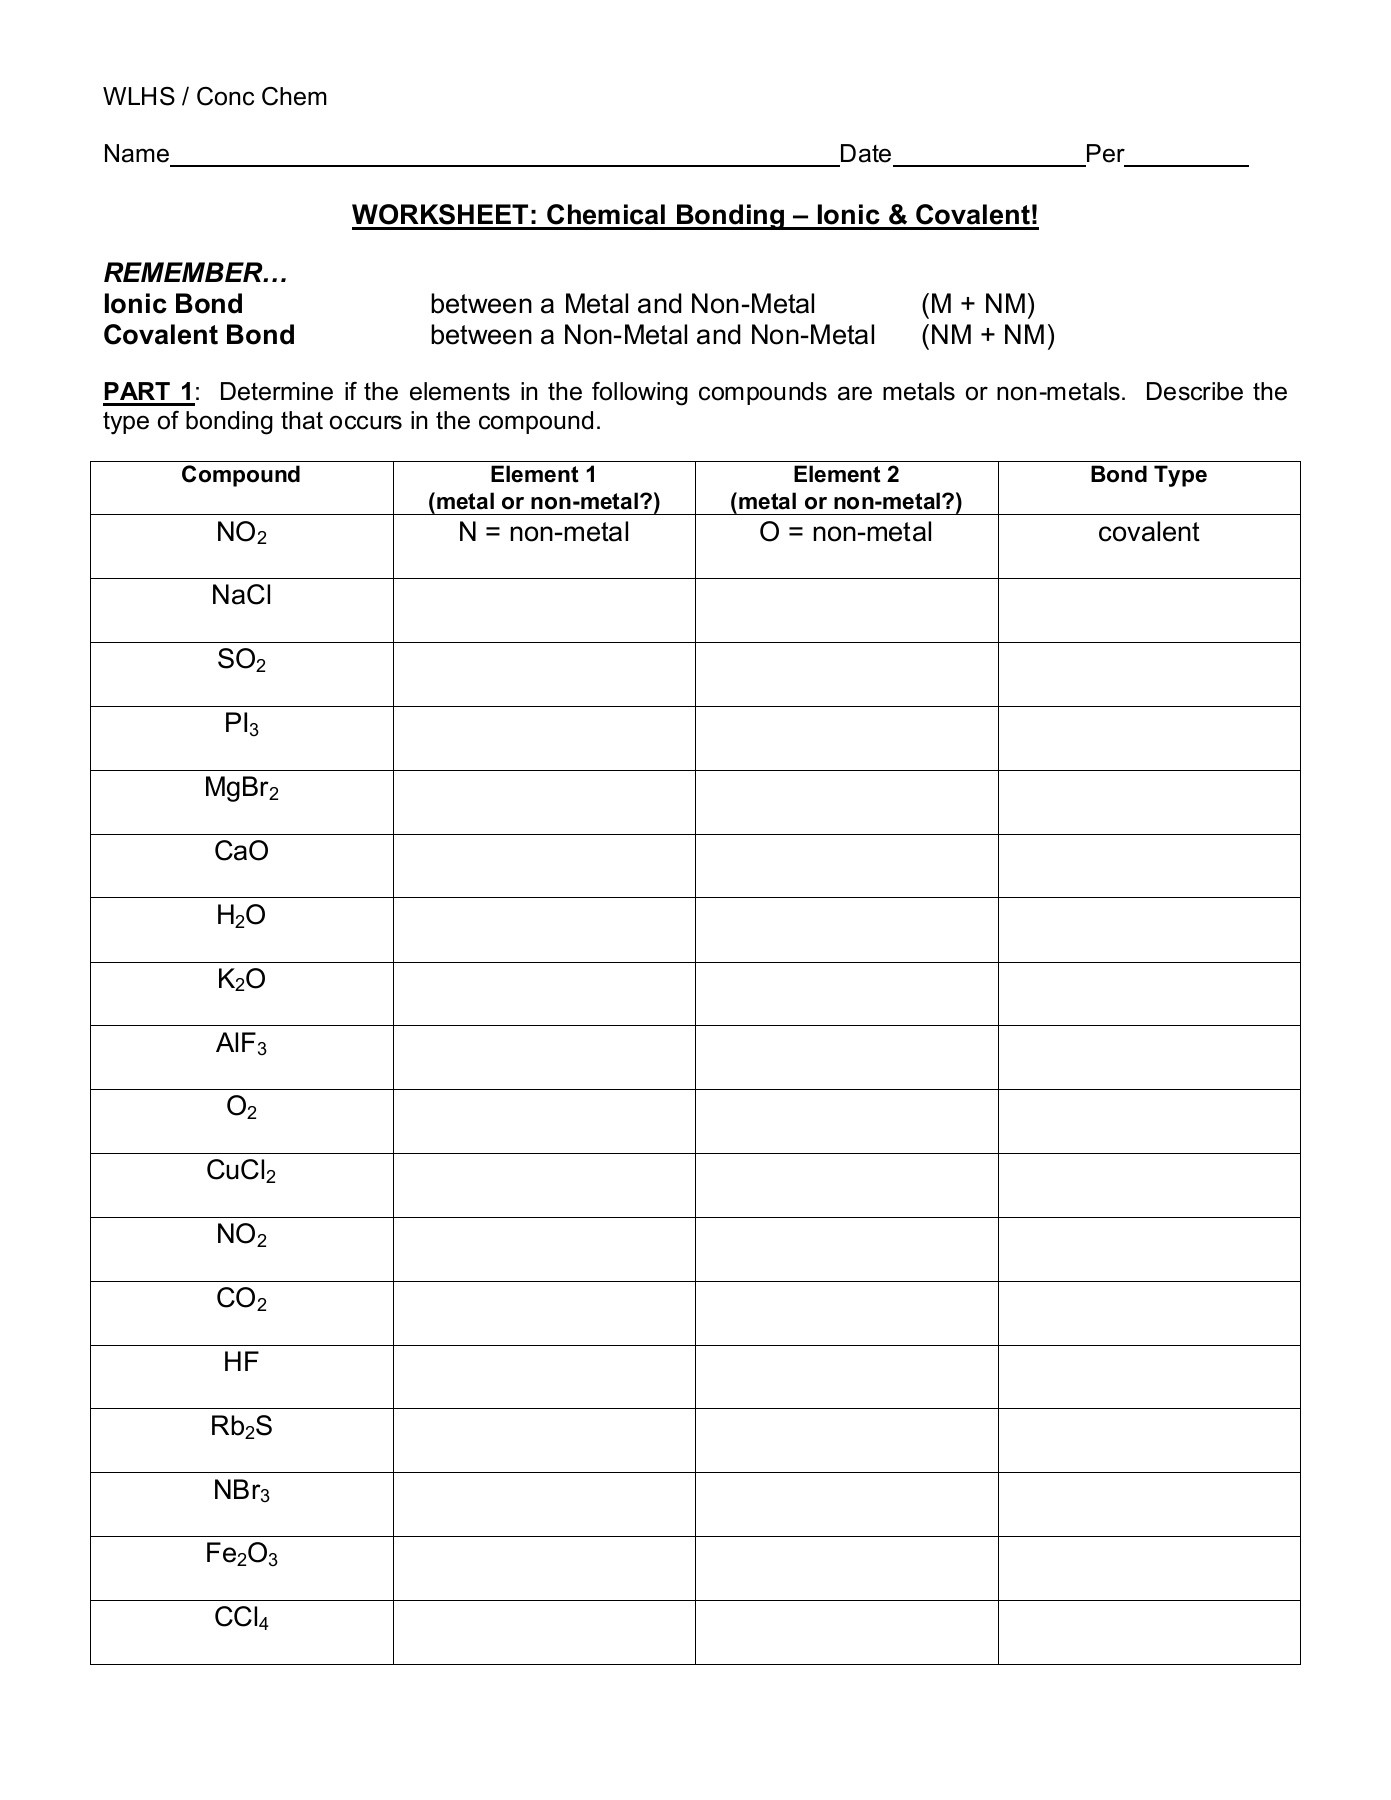 Ionic and Covalent Bonding Worksheet à¹à¸à¸à¸à¸µà¸à¸ à¸±à¸à¸à¸±à¸à¸à¸°à¹à¸à¸¡à¸µ Pages 1 2 Text Version